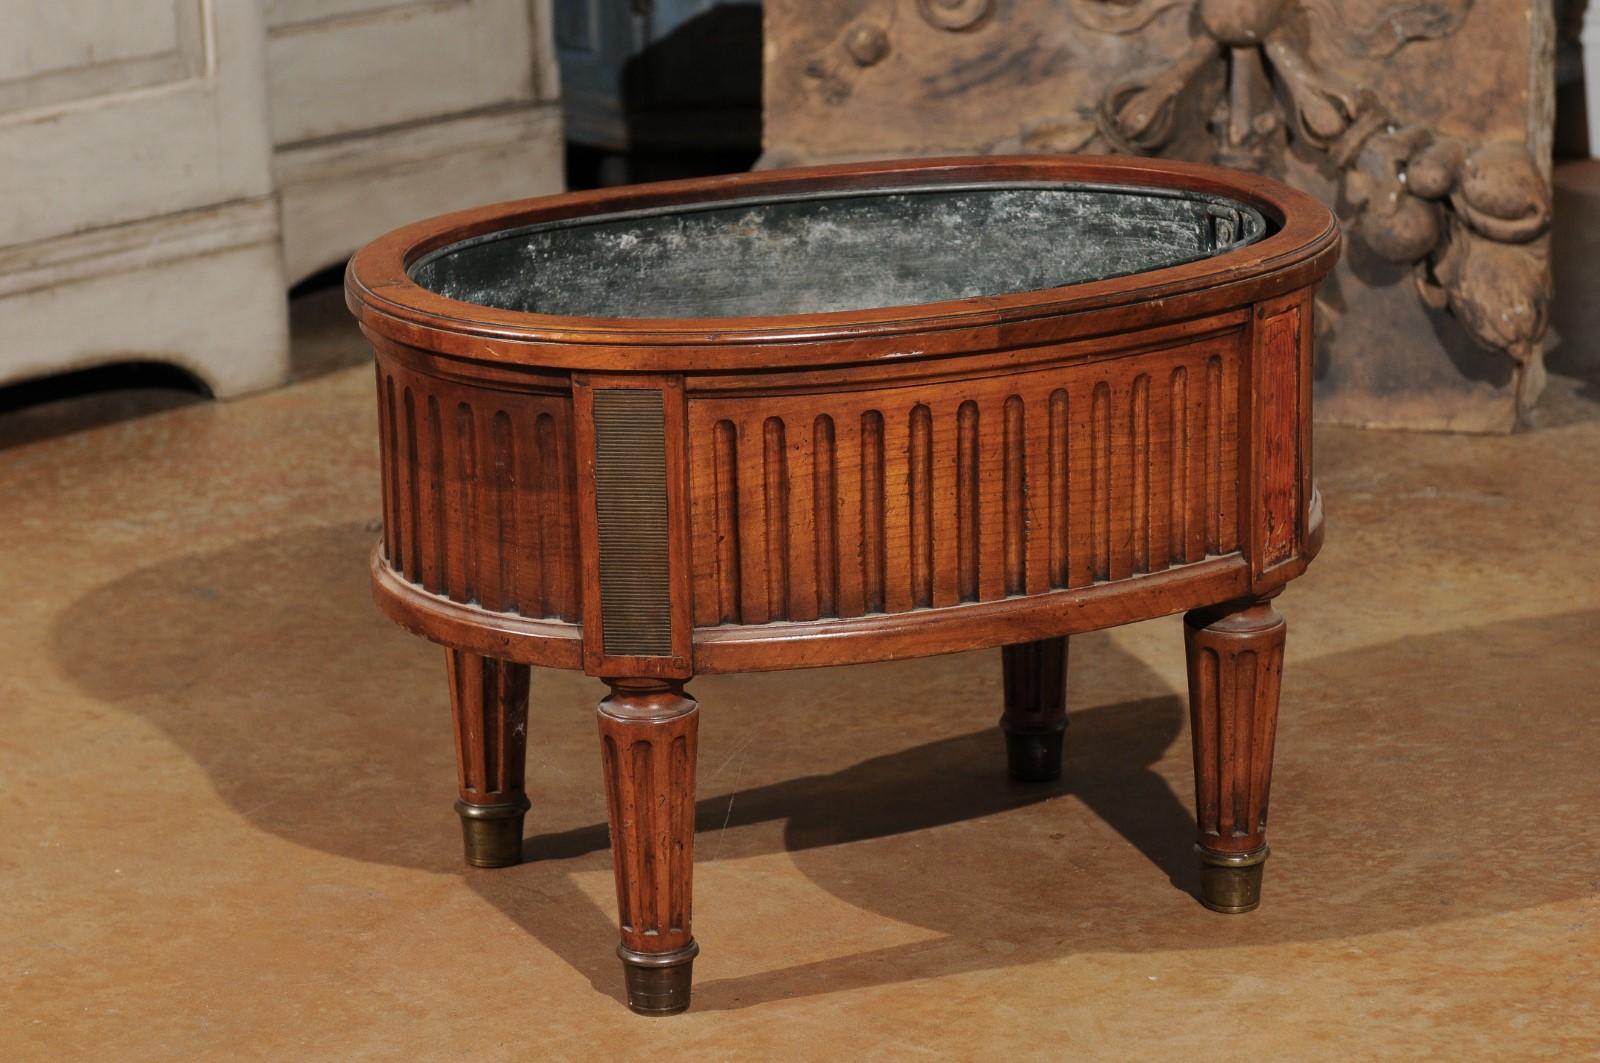 A French neoclassical style cherry jardinière planter from the 19th century, with tin-lined interior, fluted motifs and tapering legs. Born in France during the 19th century, this handsome jardinière, made of cherry, features an oval-shaped